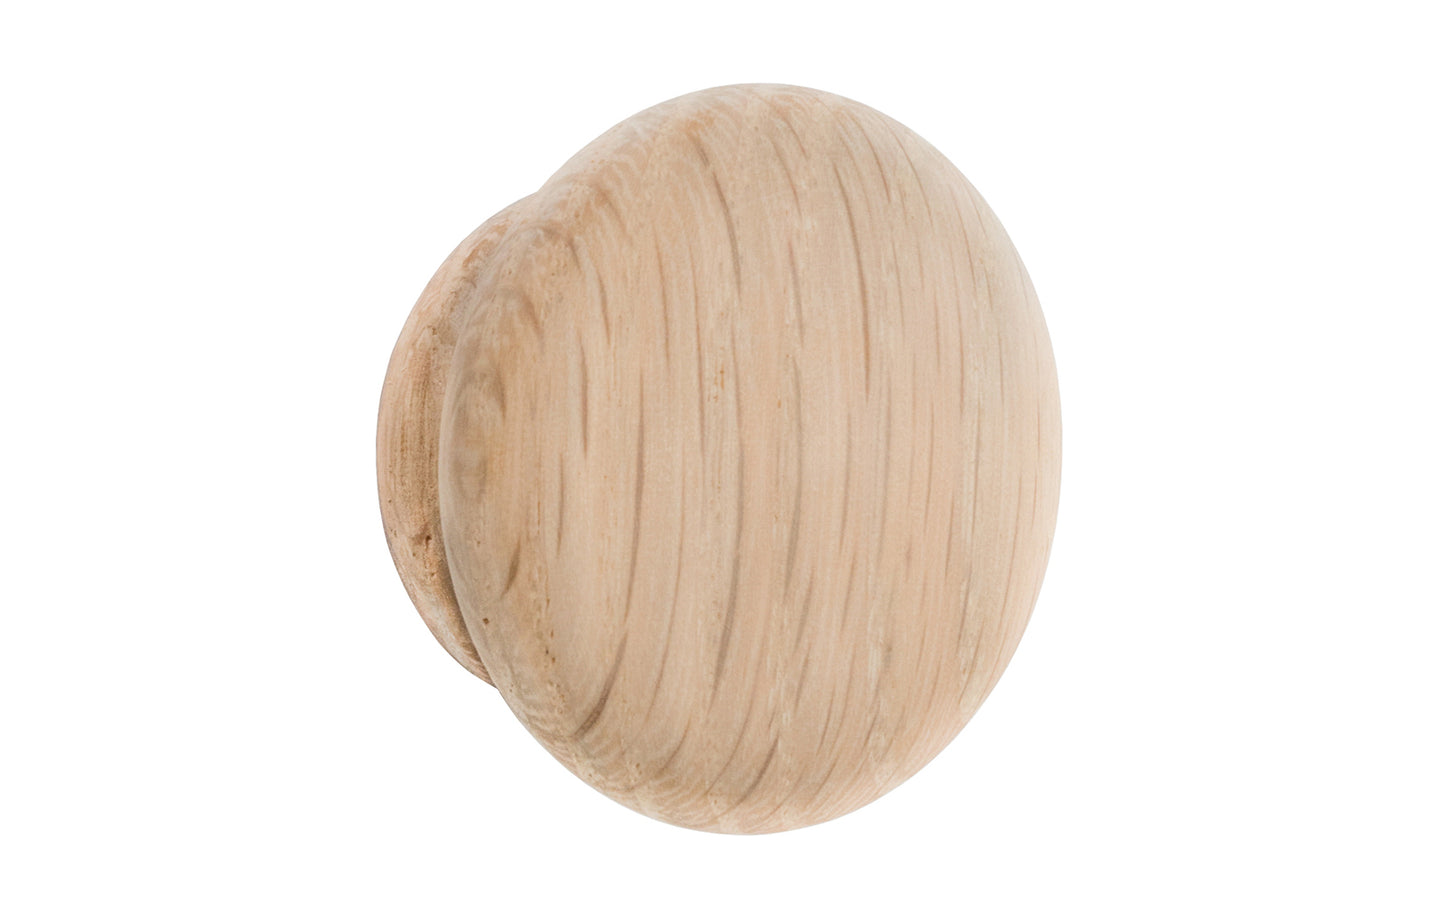 A classic oak wood round cabinet knob, & may be stained, painted, or varnished if desired. Late 19th Century, American-Oak, Craftsman style of hardware. Great for a wide variety of uses including drawers, kitchen cabinets, smaller doors, furniture, cabinet doors. 1-3/4" diameter knob.